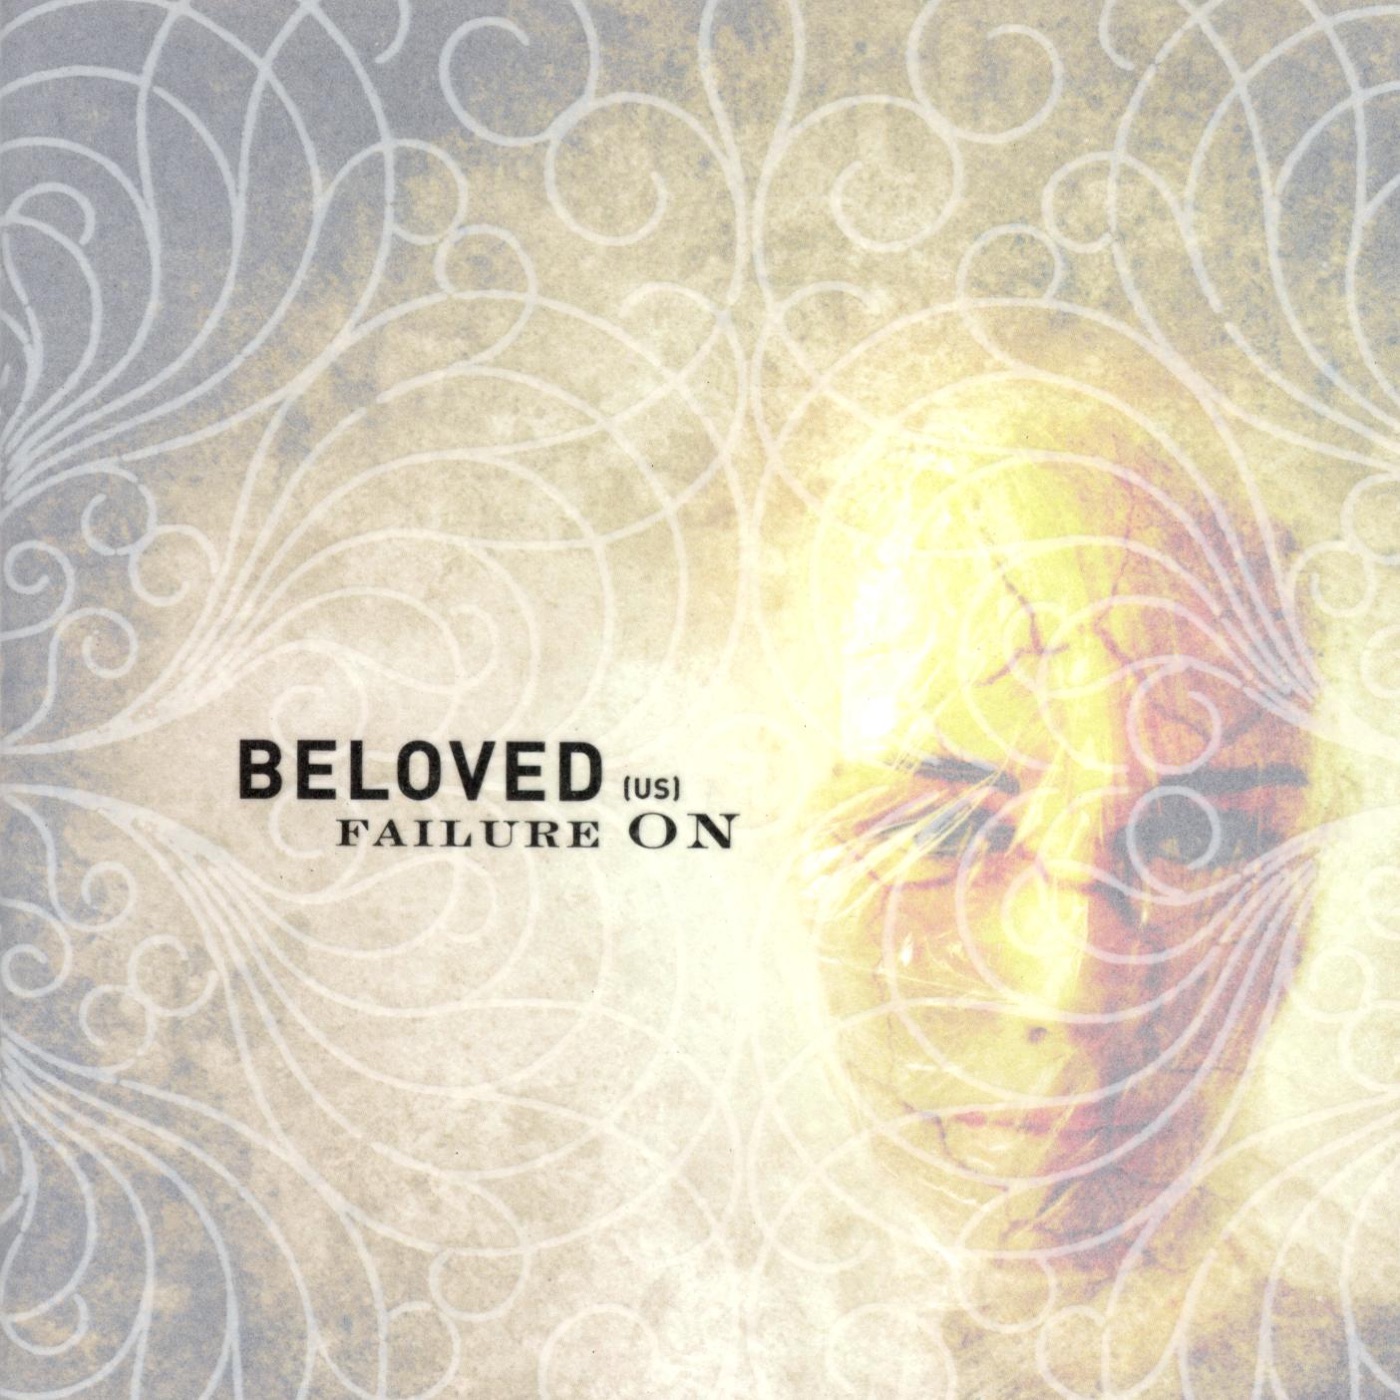 Failure On by Beloved